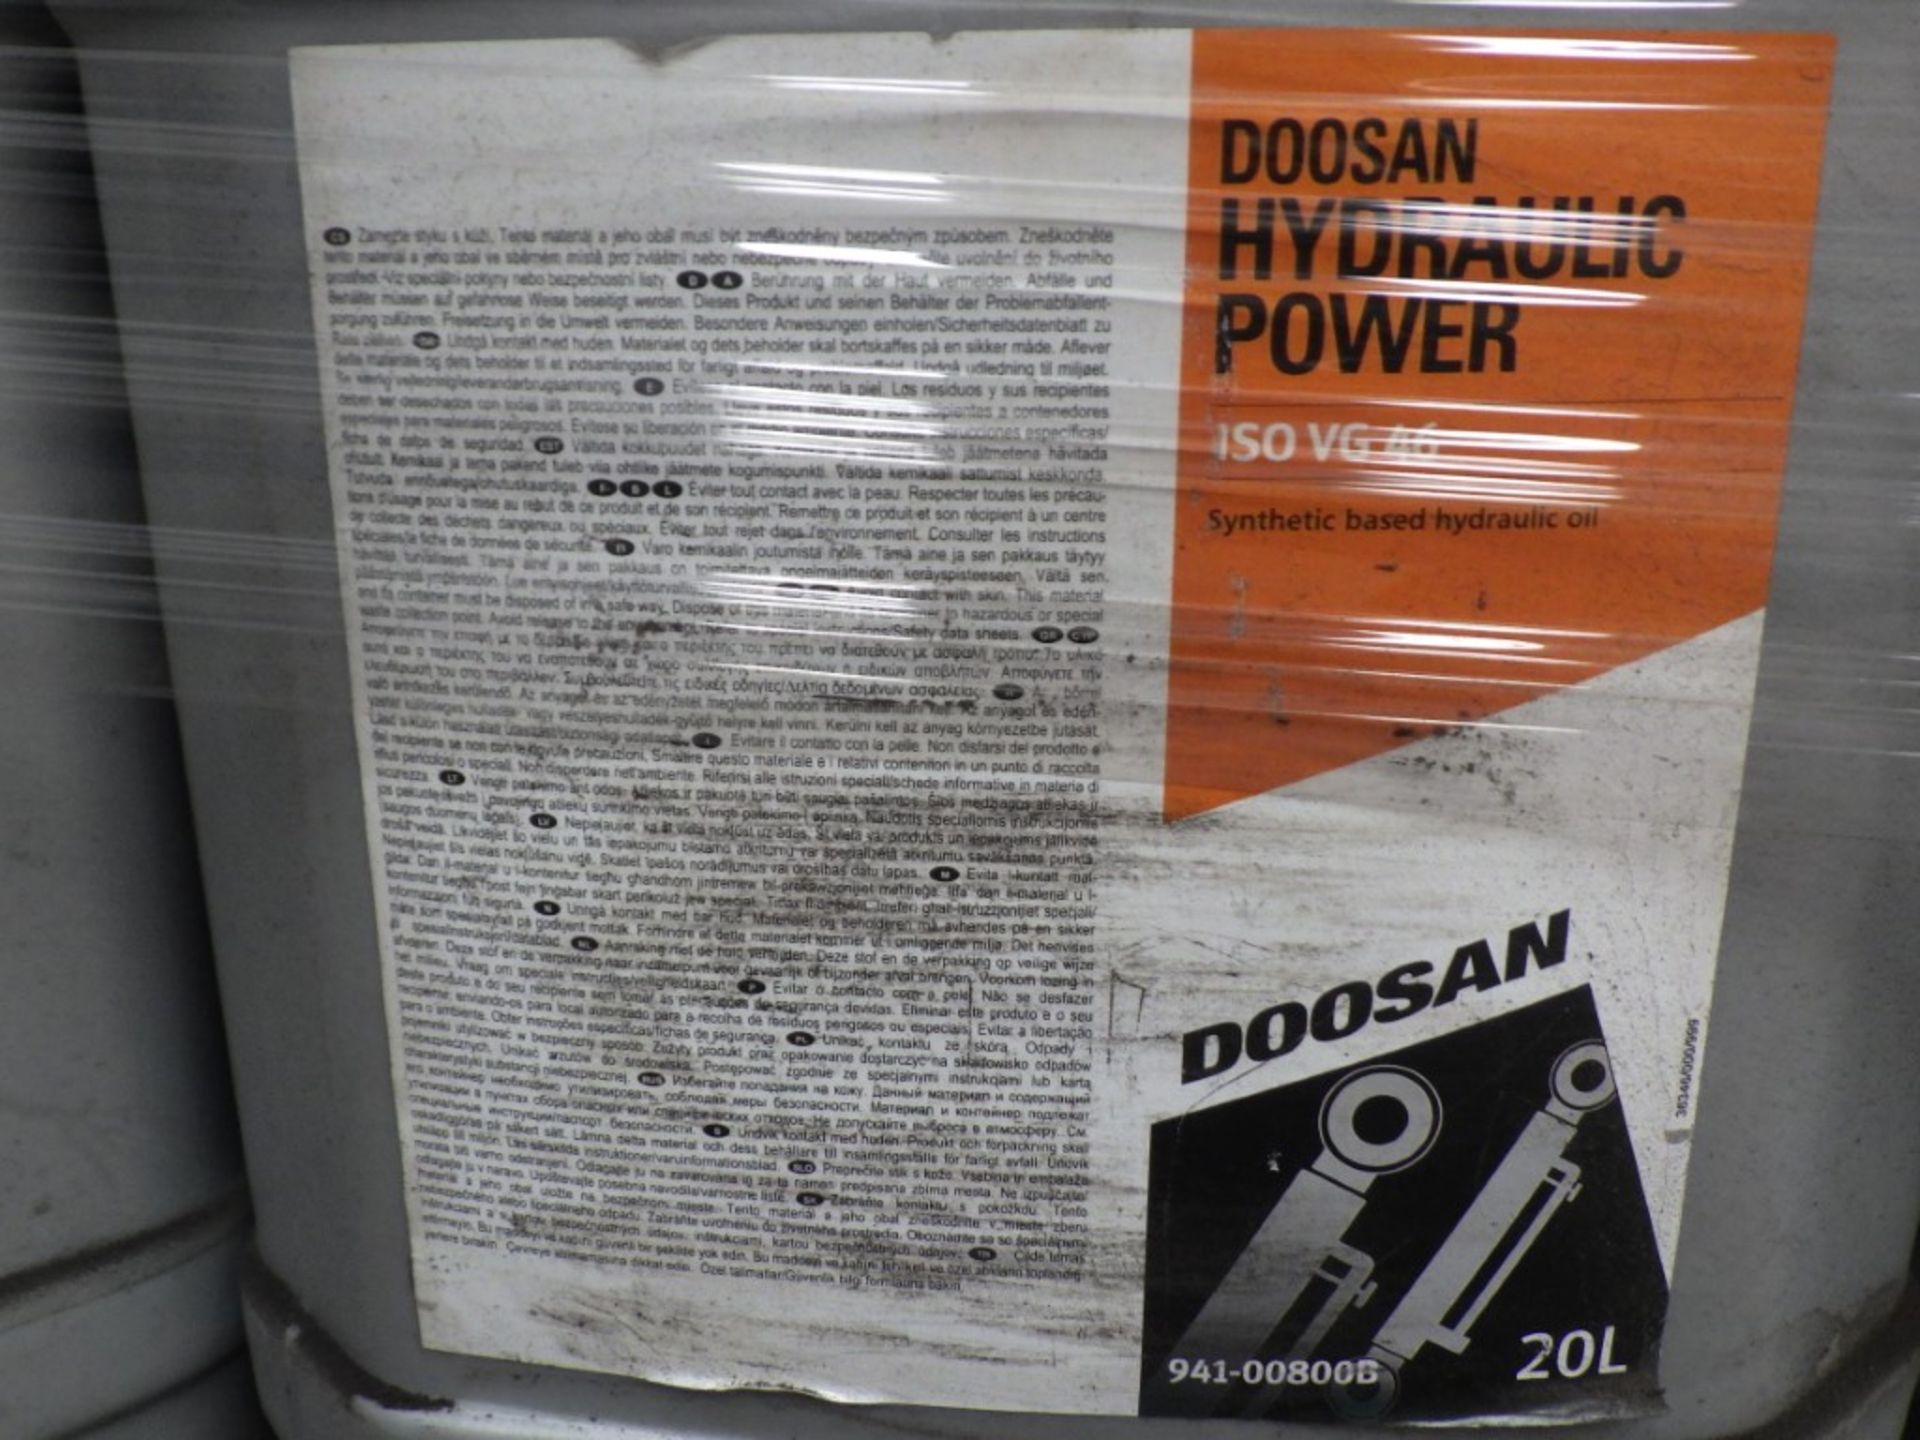 DOOSAN ISO VG 46 HYDRAULIC OIL 20L SYNTHETIC BASED, 20 L CONTAINERS (31 OF) - Image 2 of 5